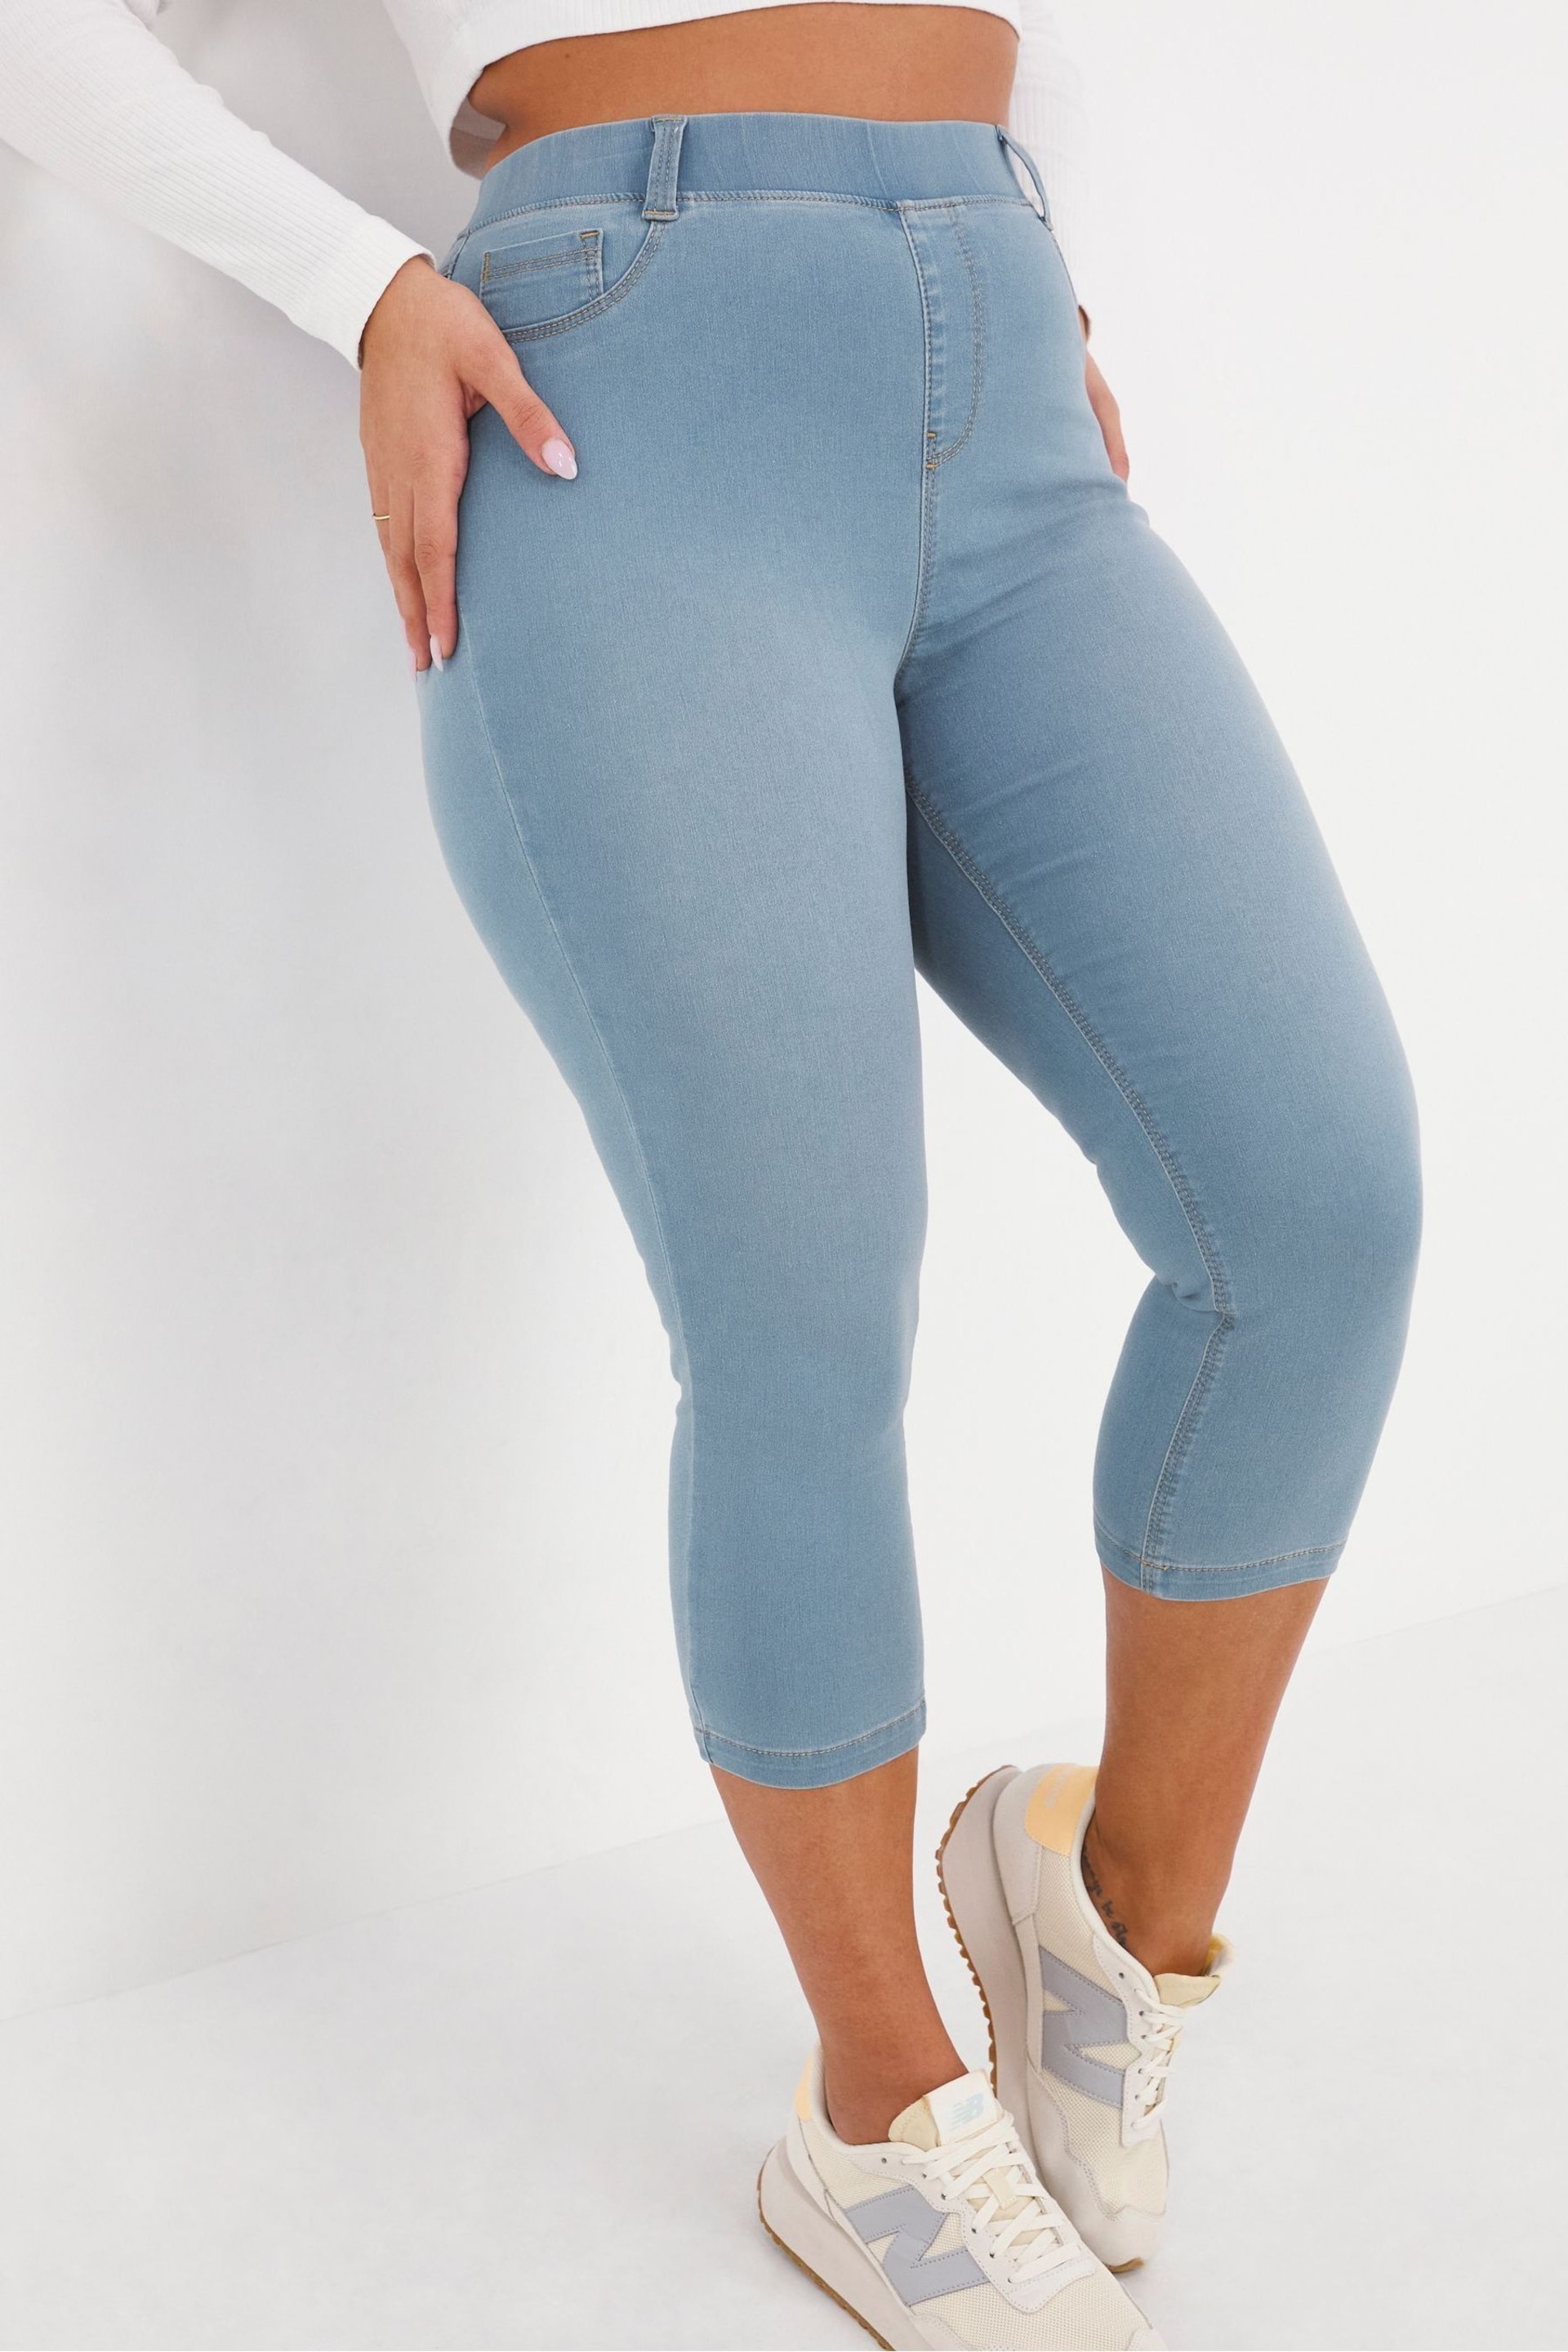 Simply Be Blue Amber Light Crop Jeggings - Image 1 of 4